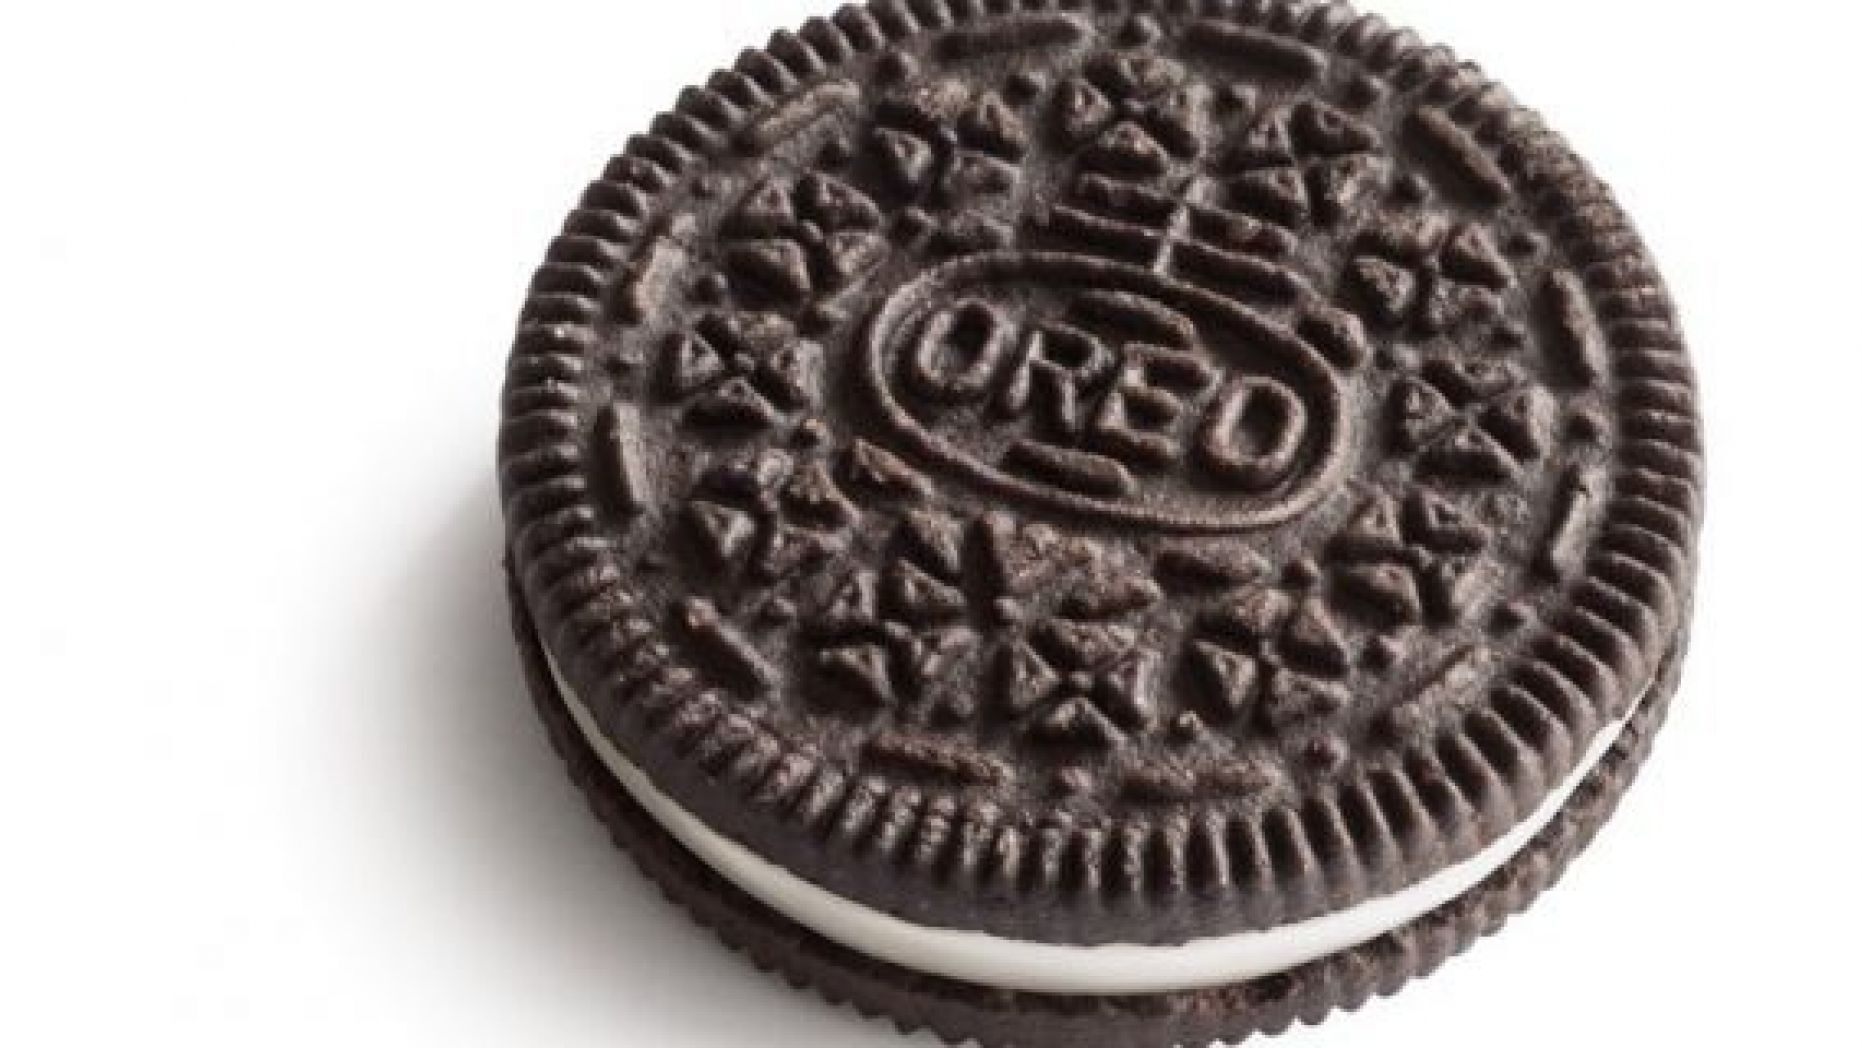 6 things you didn't know about Oreo cookies | Fox News